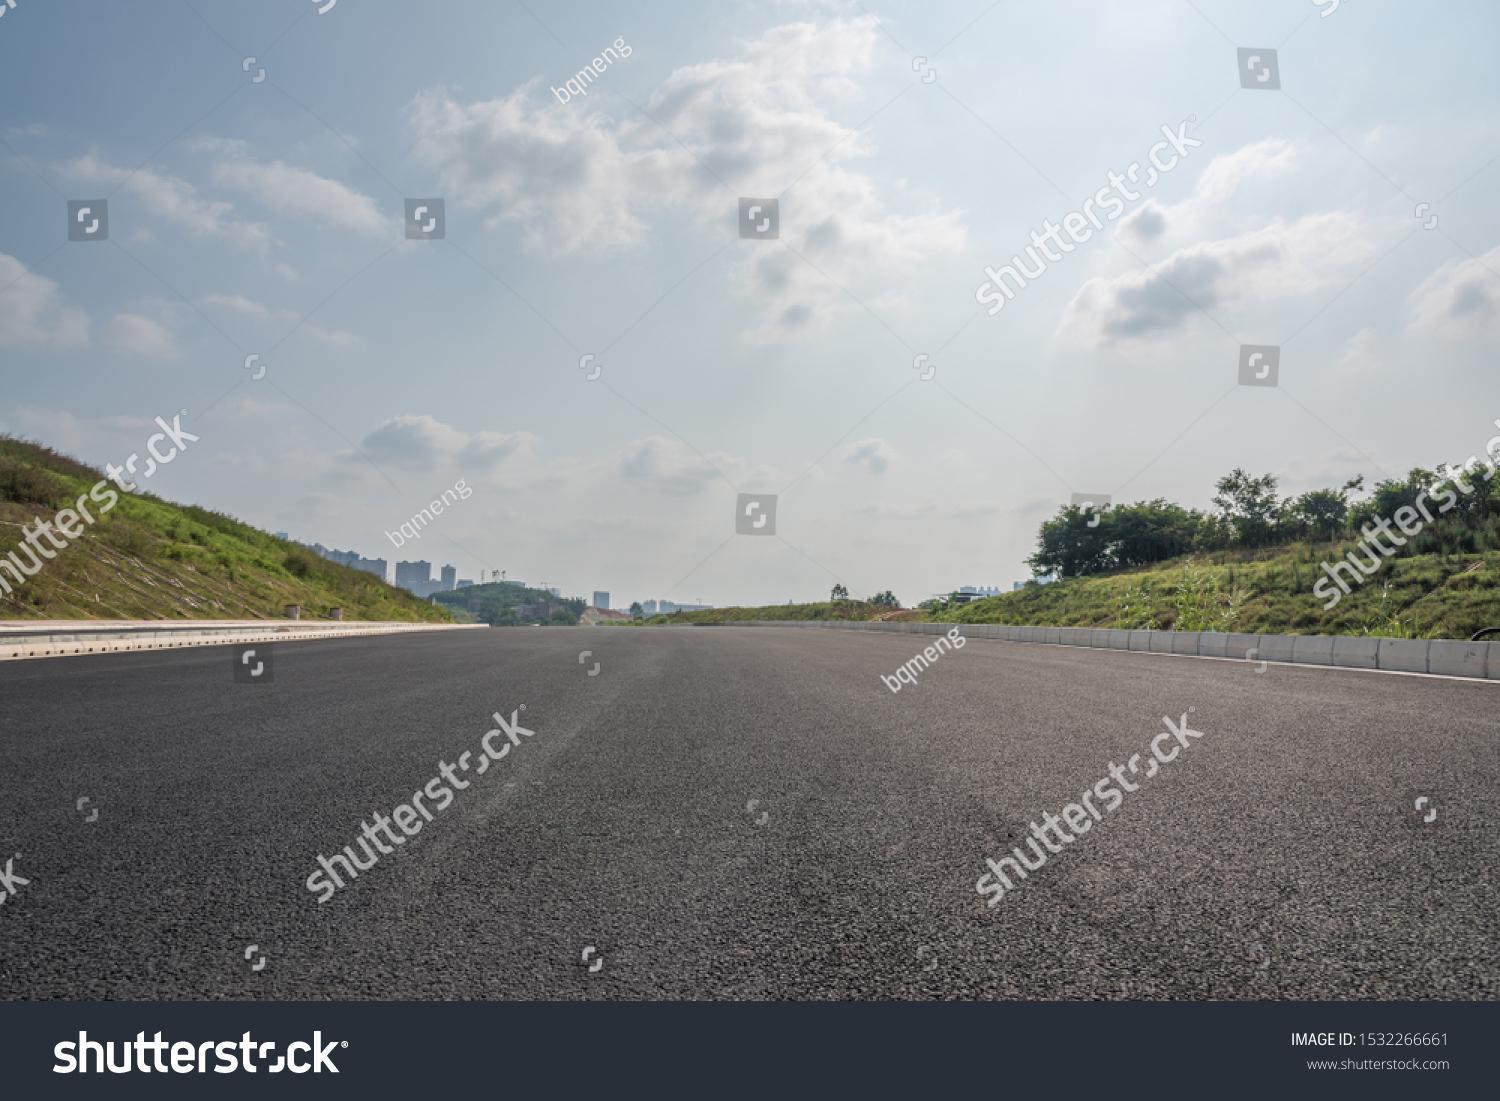 Outdoor asphalt road low angle perspective view background #1532266661